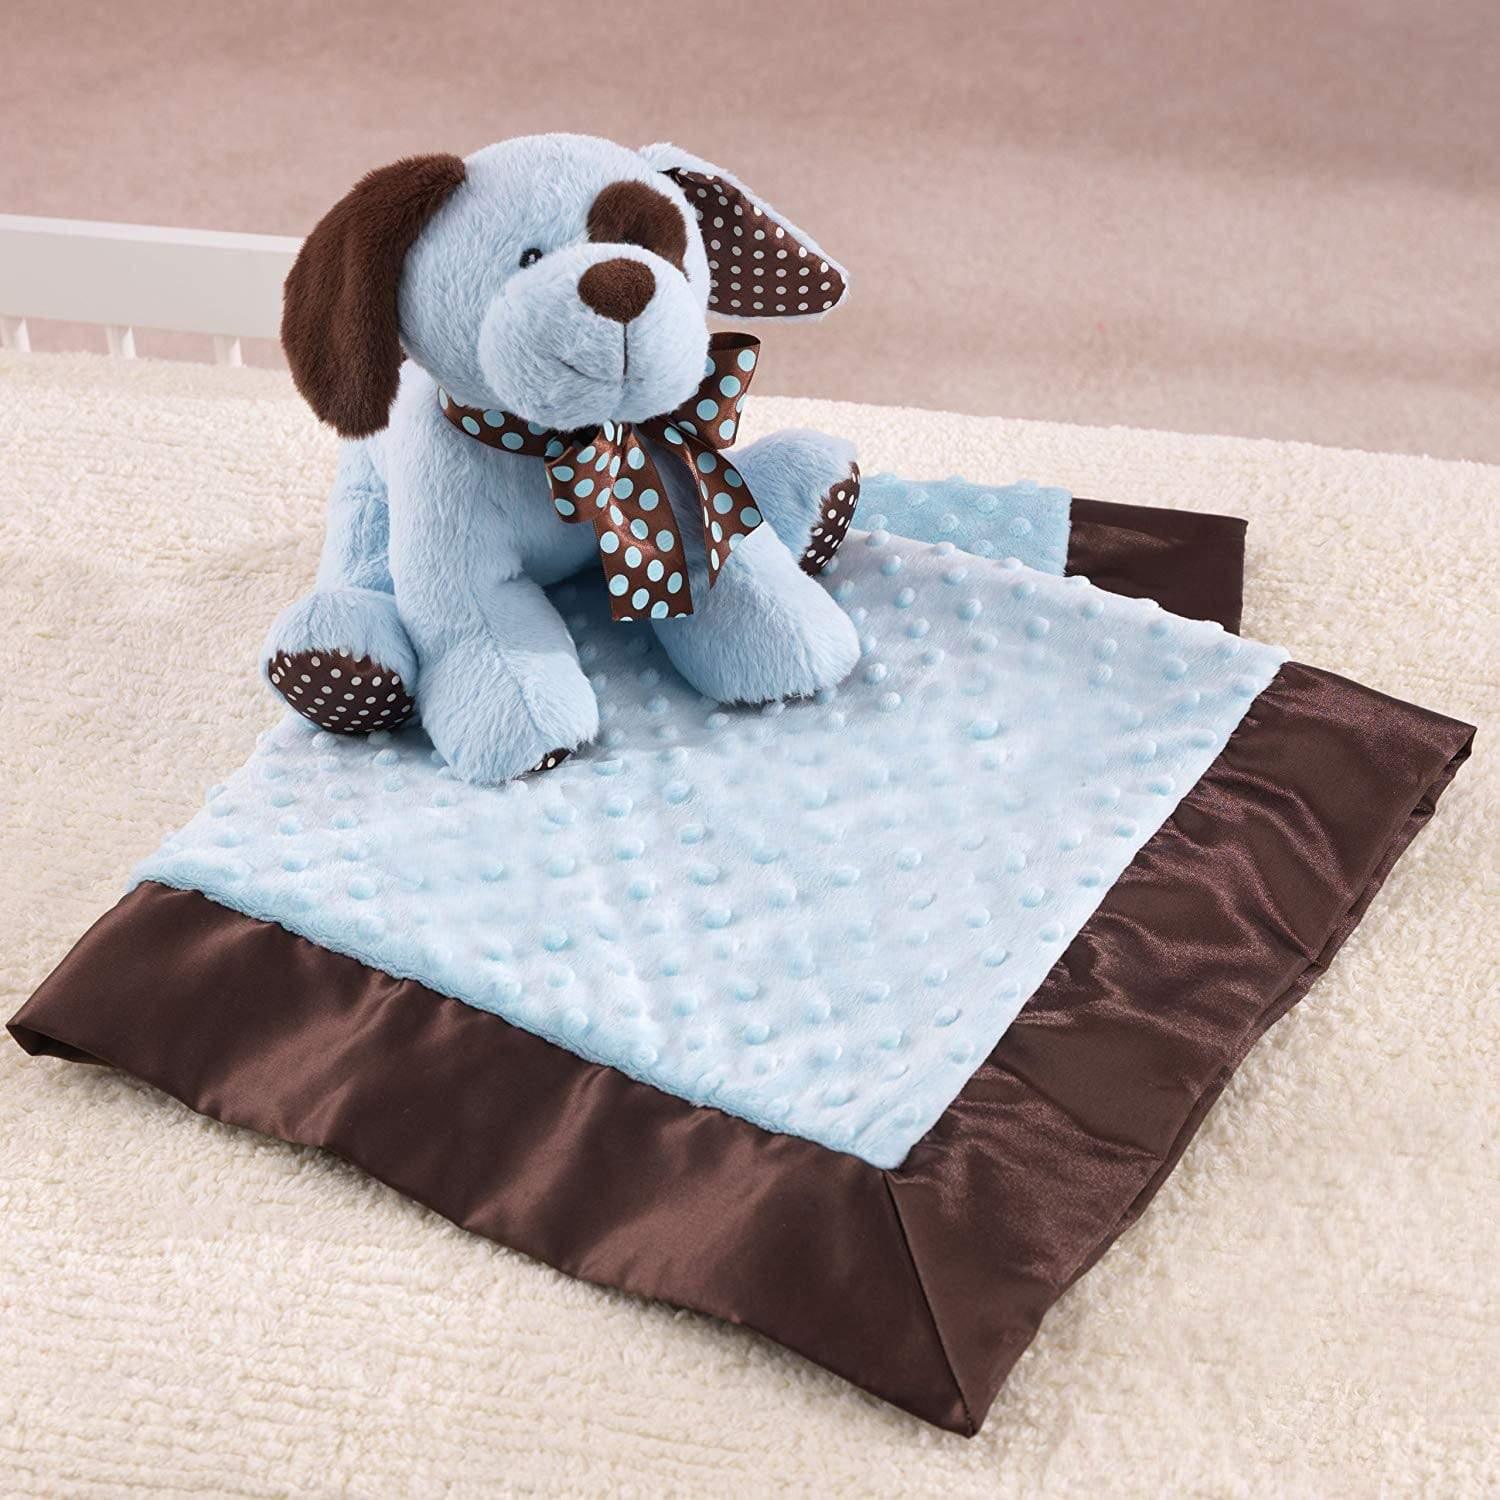 "Blinky" the 10.5in Blue Plush Puppy and Blanket Set by KidKraft